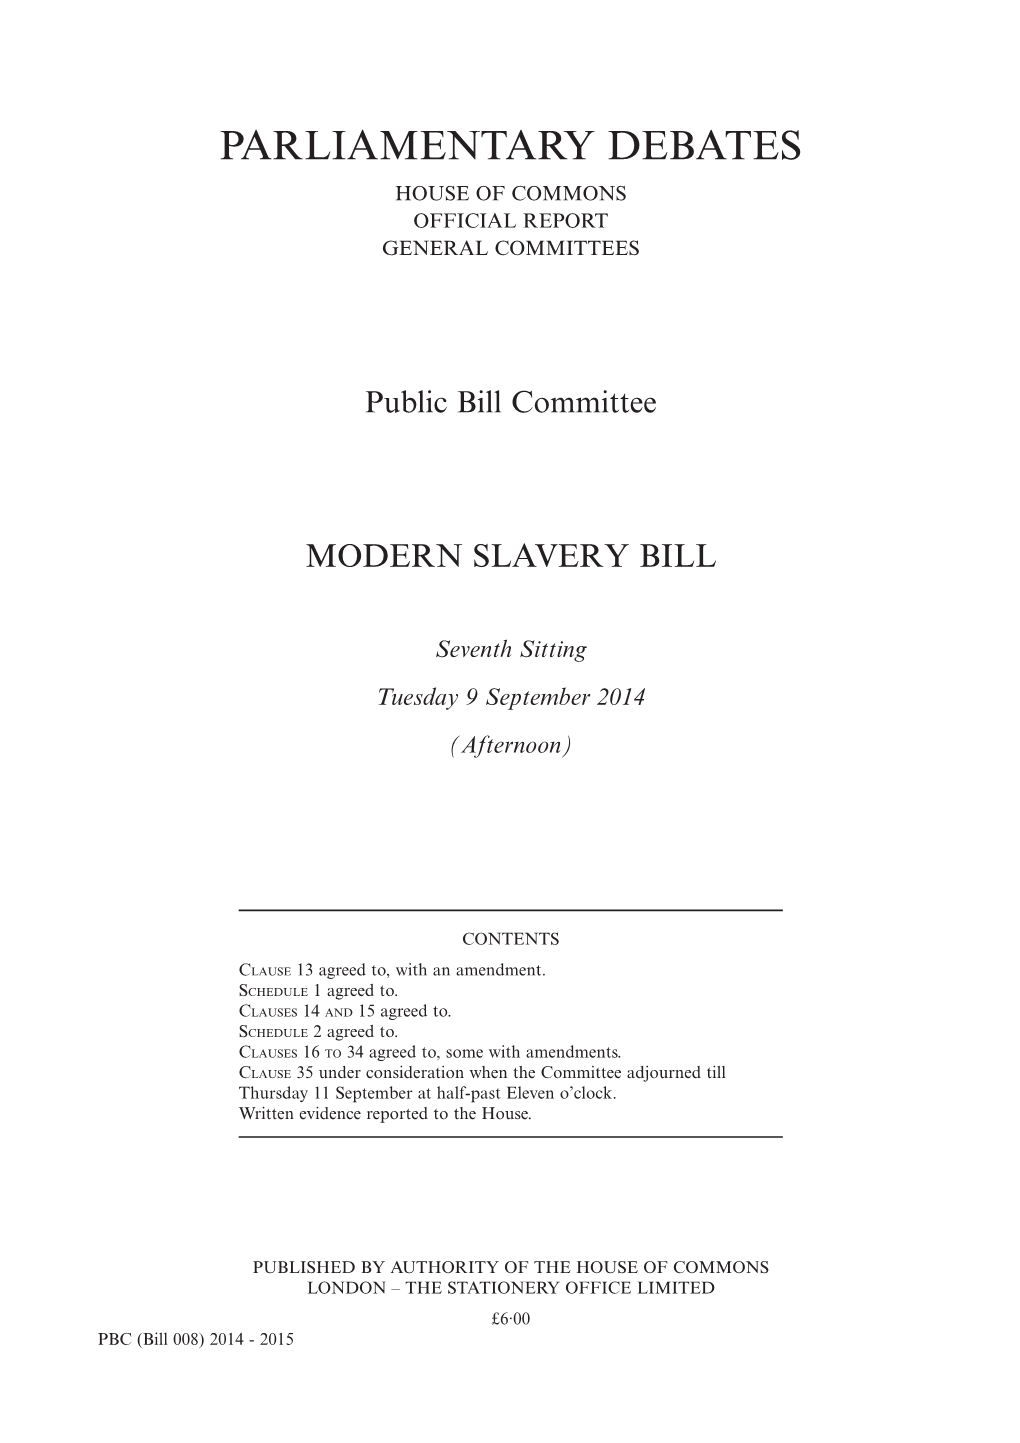 Parliamentary Debates House of Commons Official Report General Committees